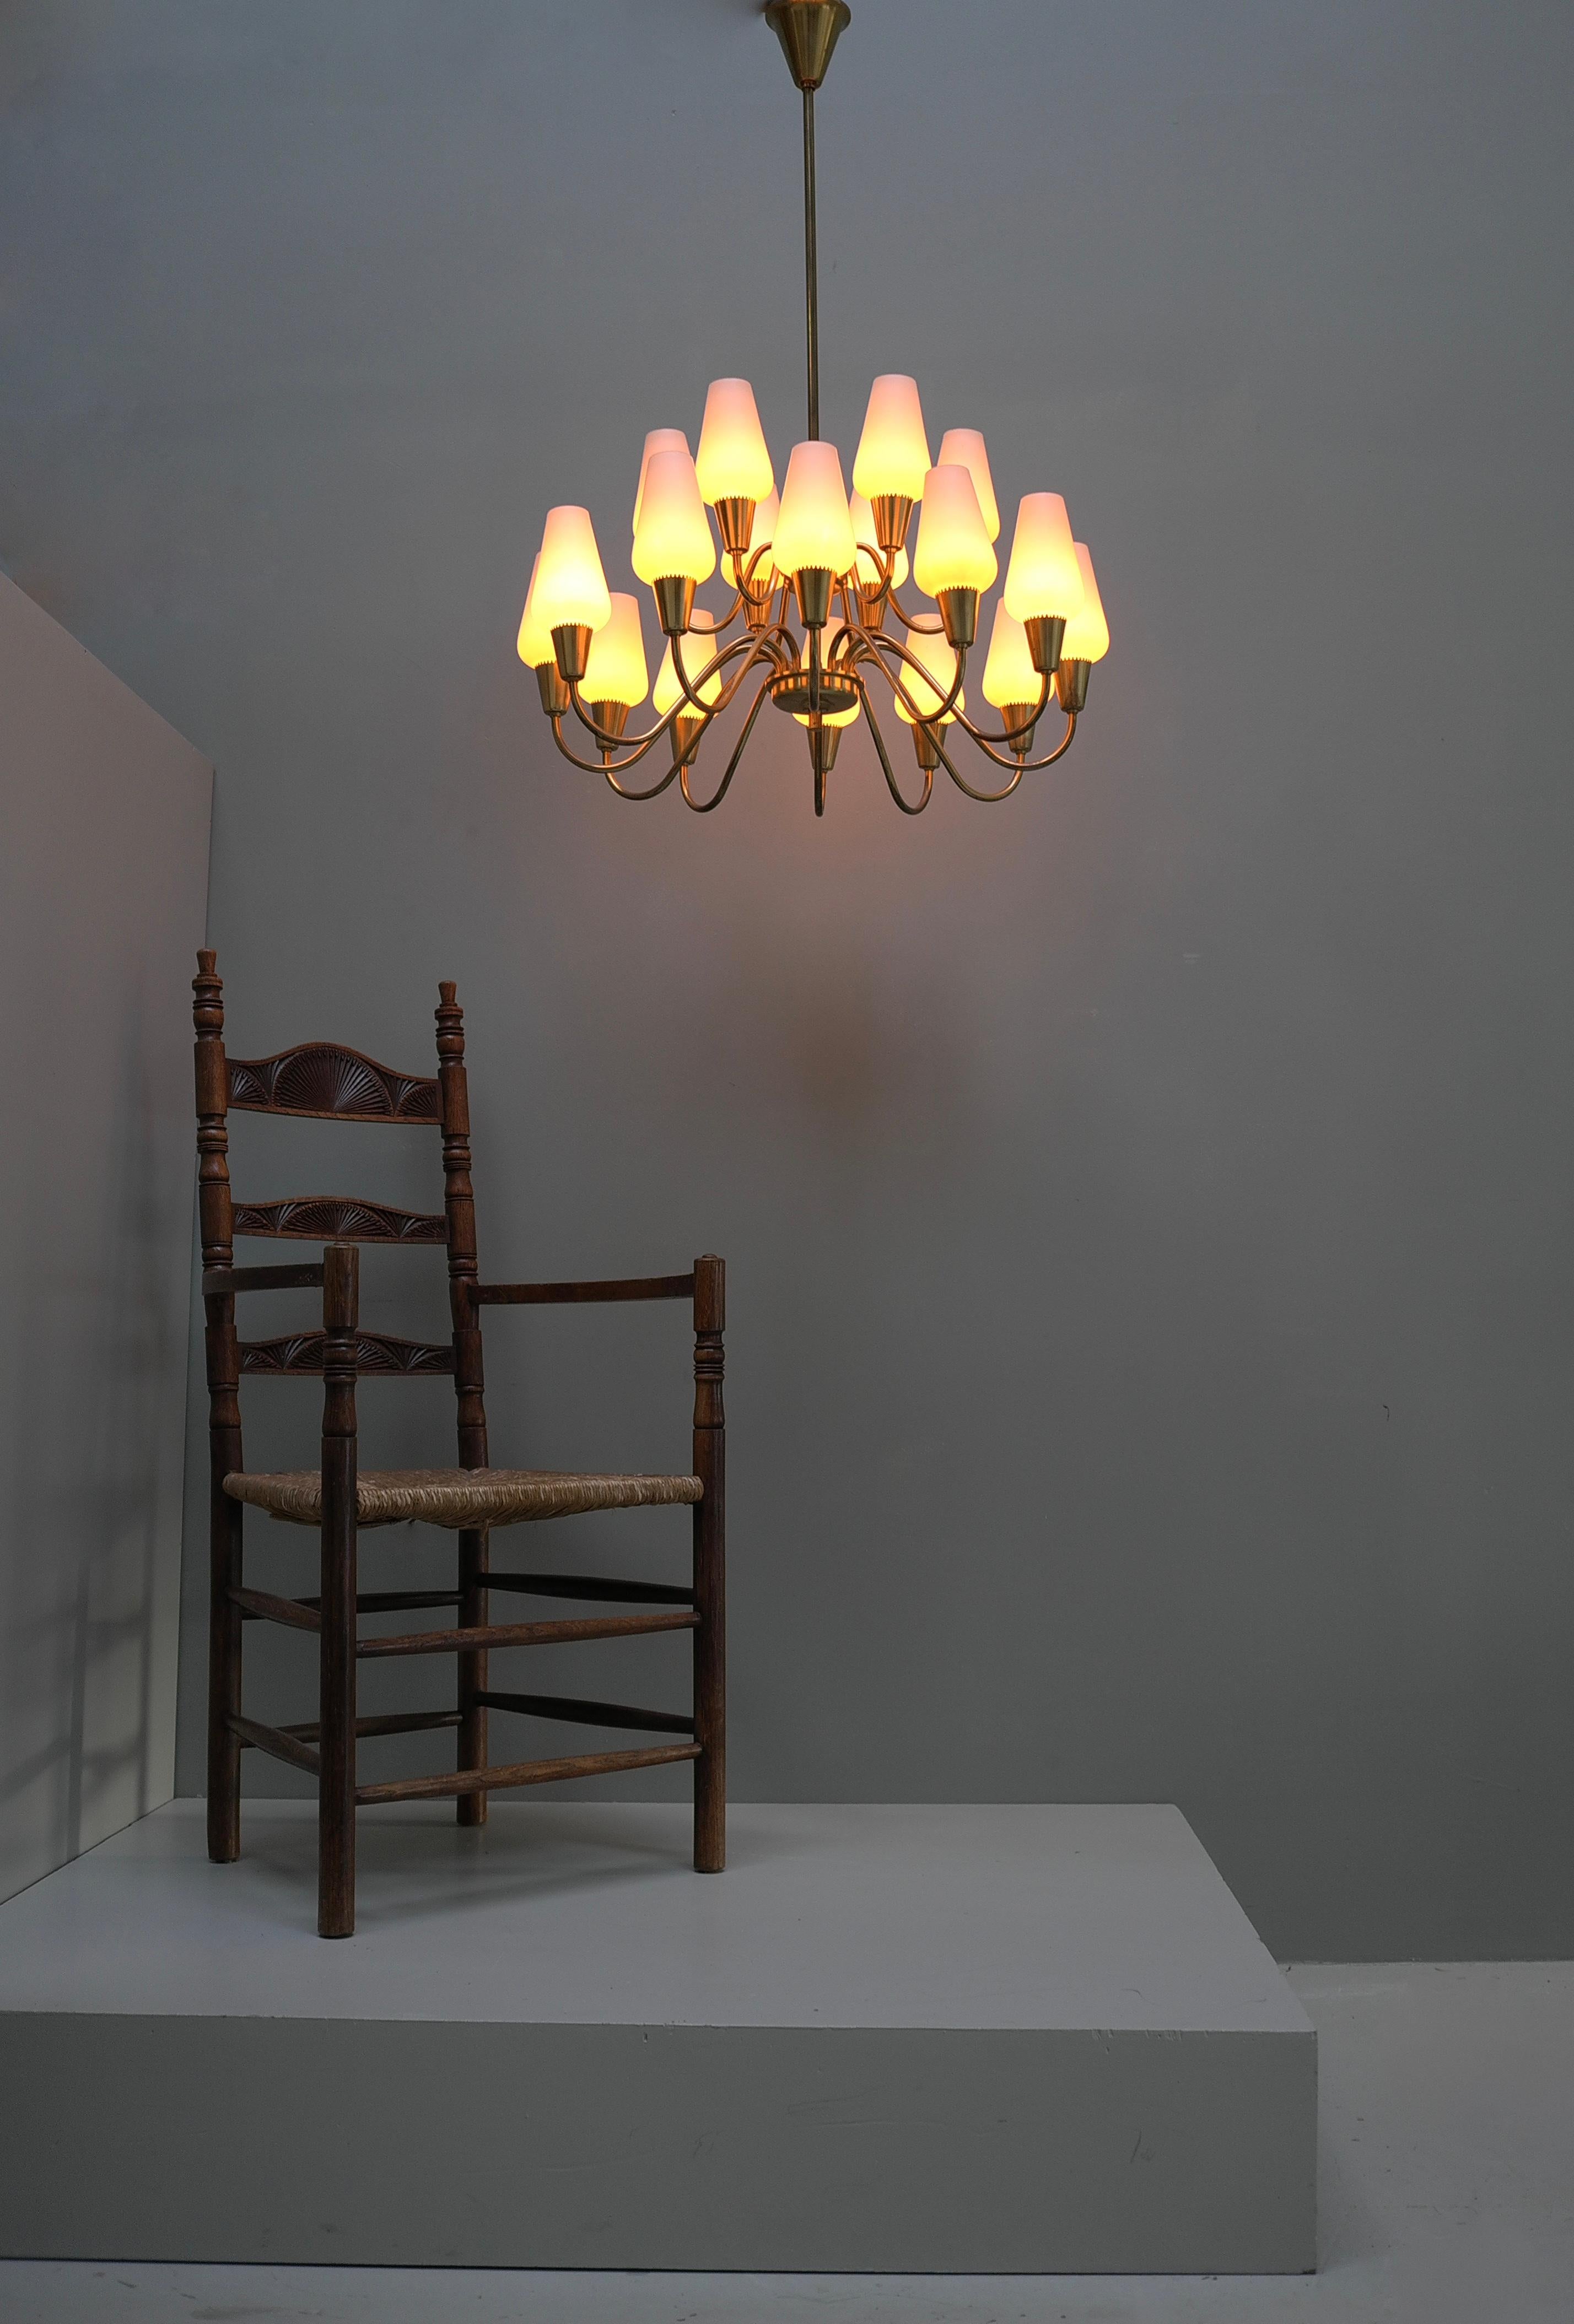 Brass and Opaline Glass Chandelier by Bent Karlby for Lyfa, Denmark 1960s

Well made quality piece that gives a very warm light depending what kind of bulbs you use.